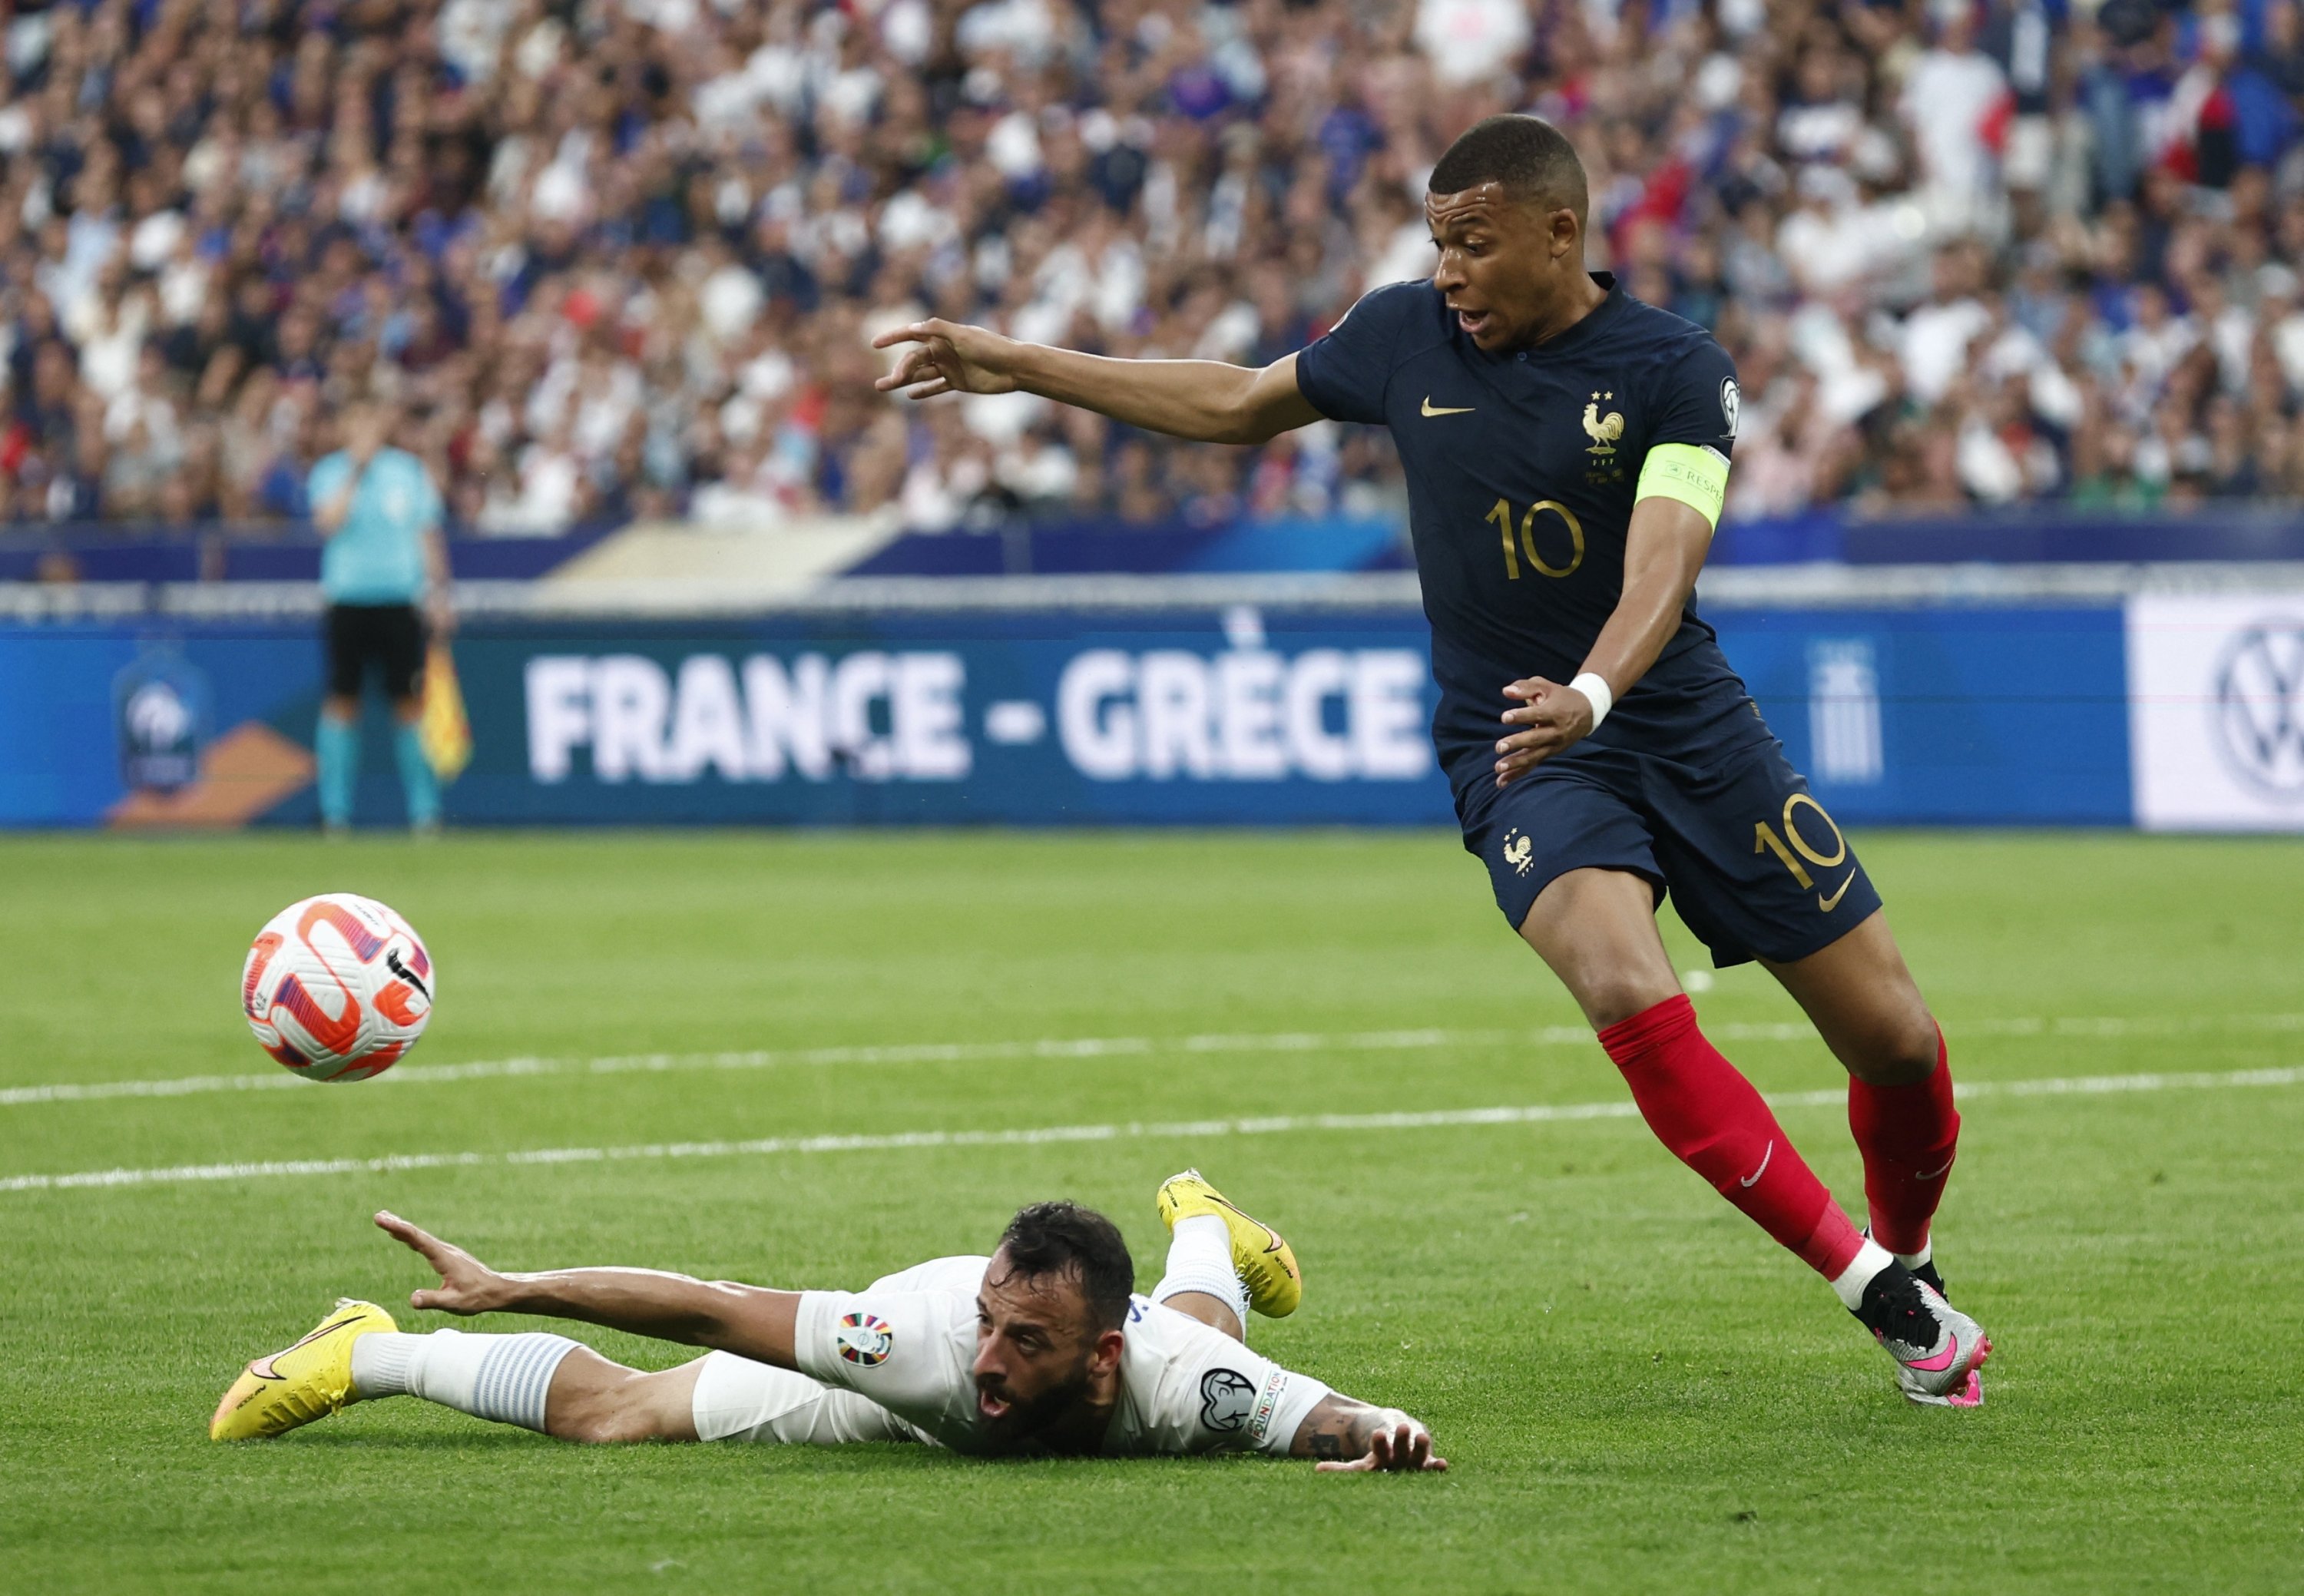 Mbappe penalty seals France's Euros qualifiers victory over Greece